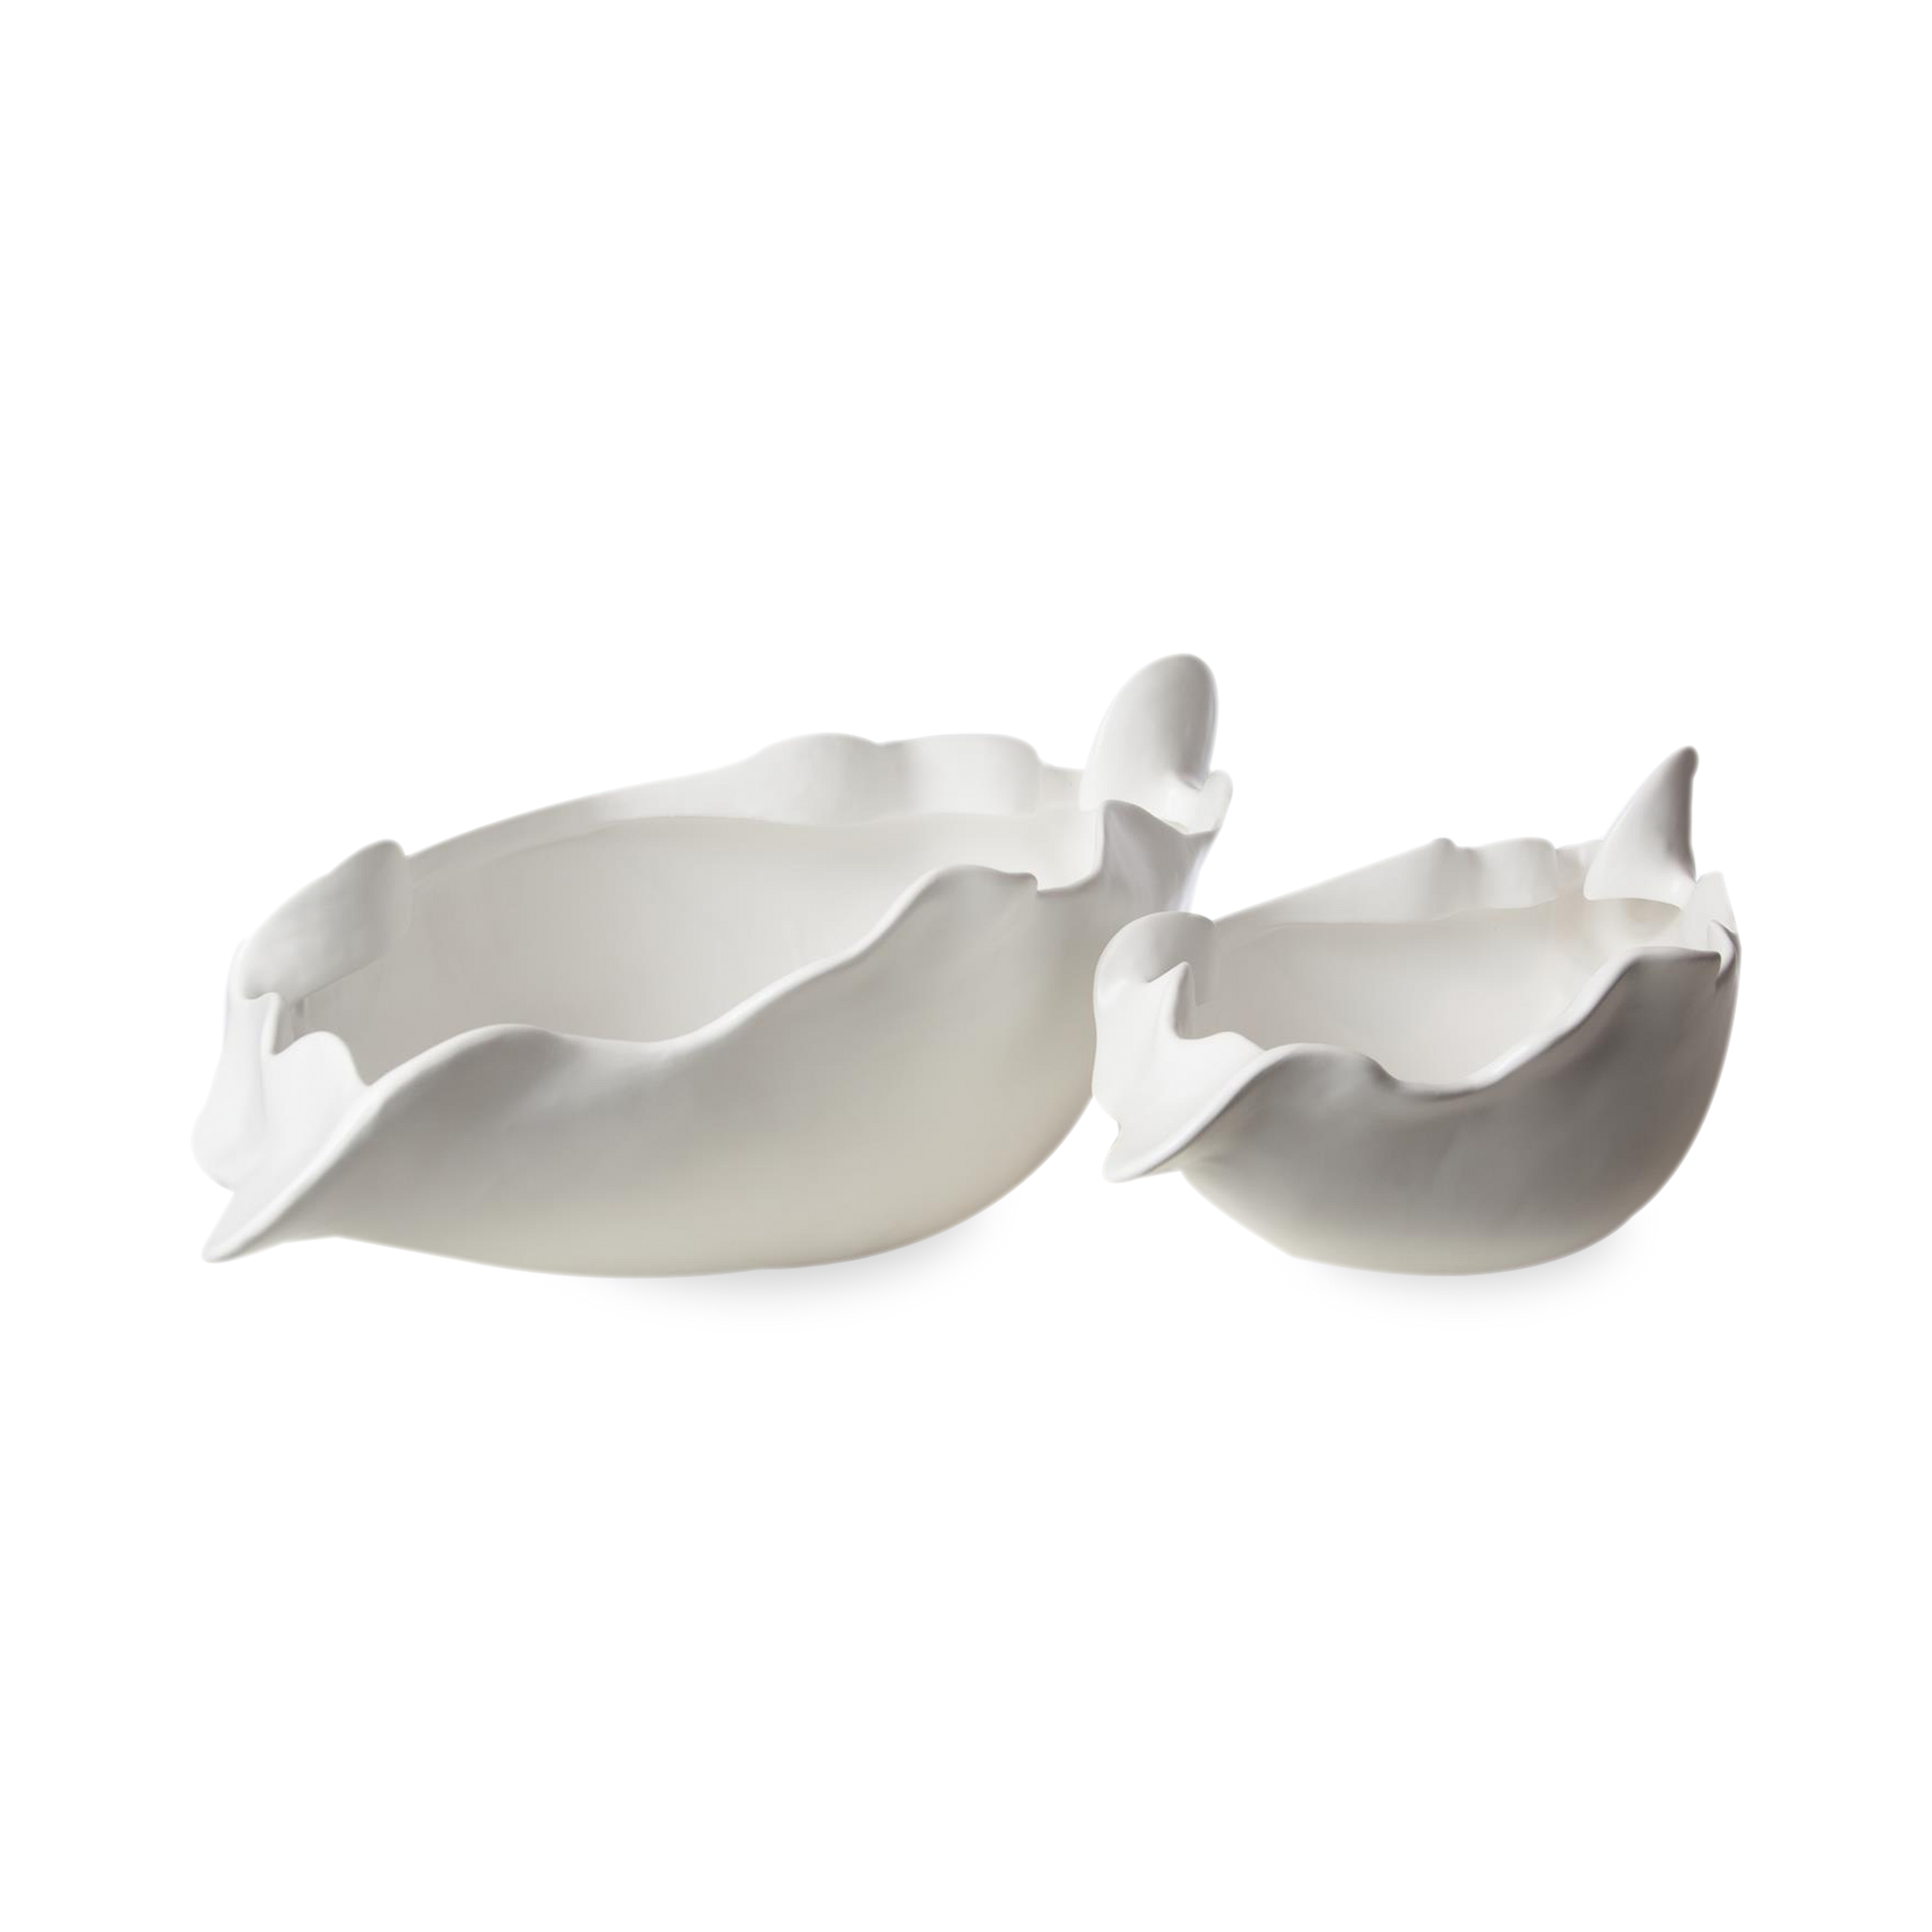 Soft and organic in shape, the Free Form Bowl is a beautiful interpretation of graceful, abstract forms found in nature.